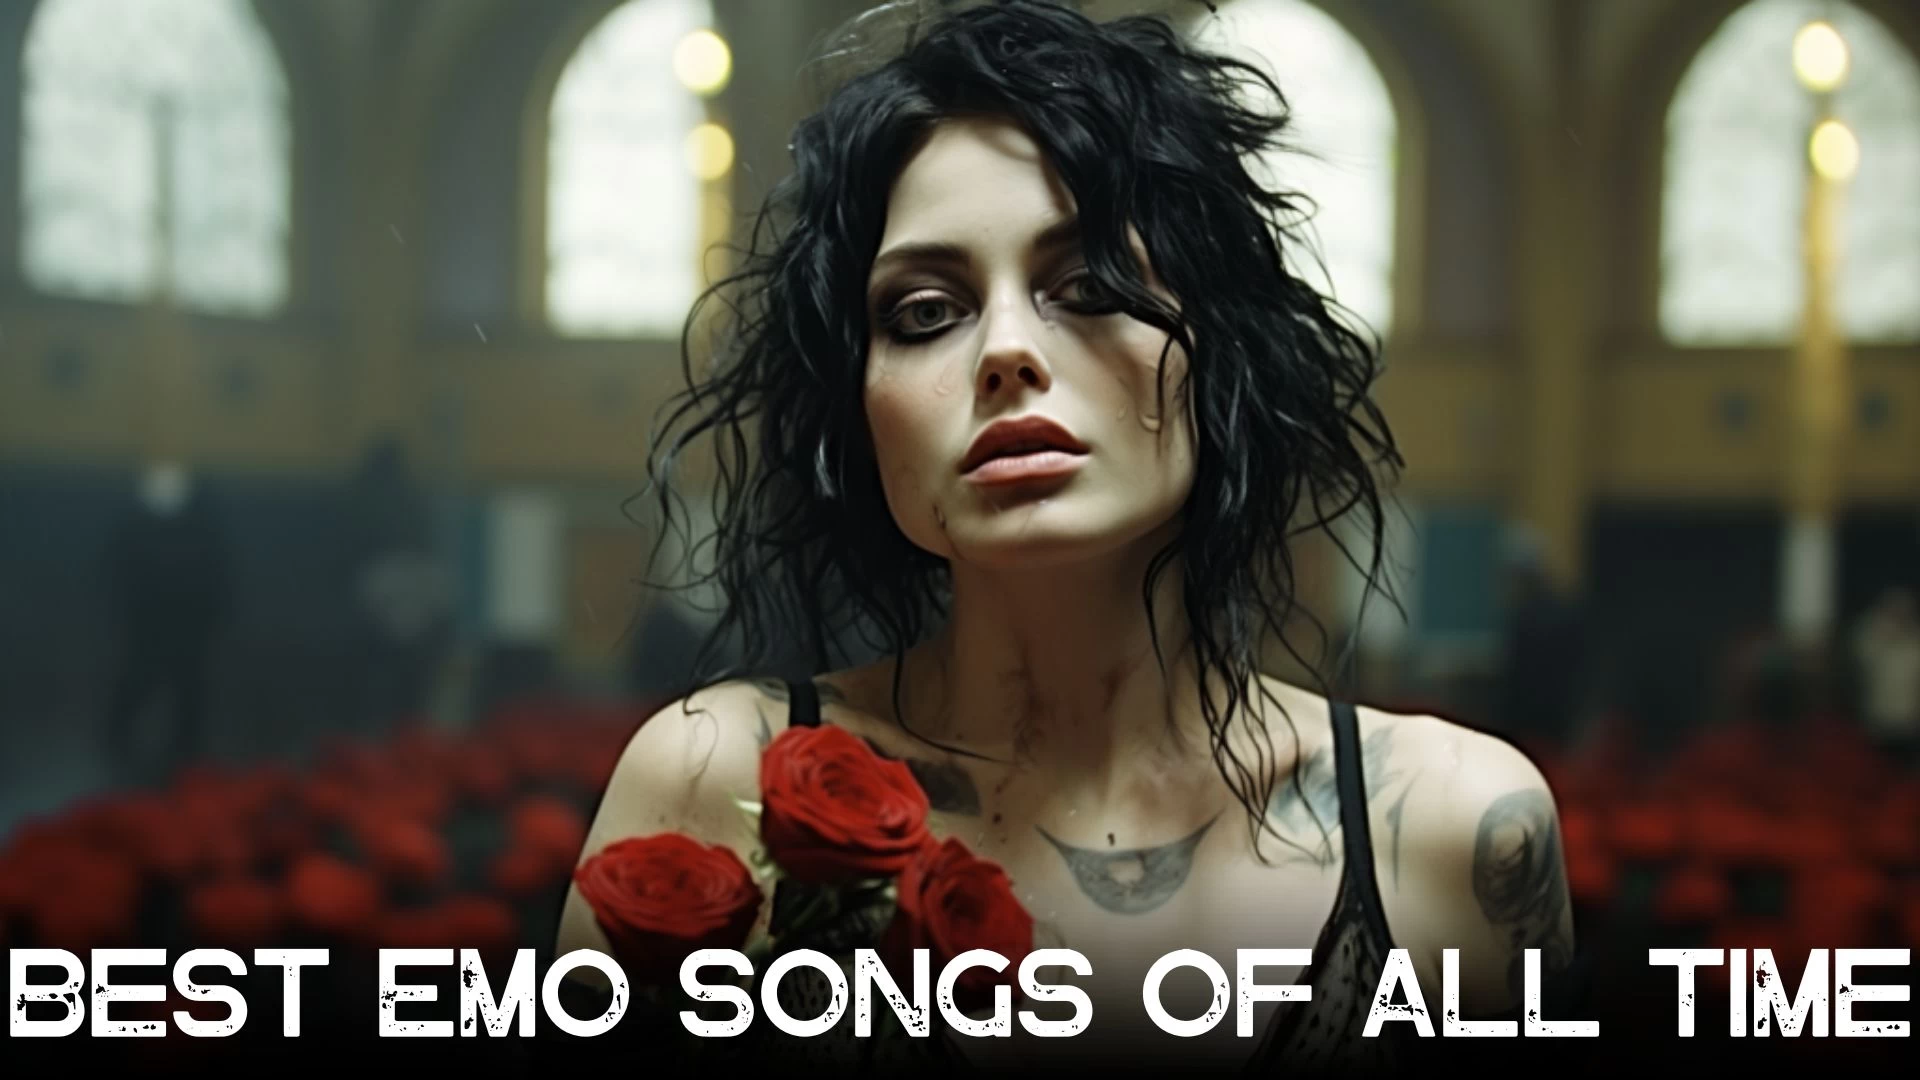 Best Emo Songs of All Time - Top 10 Greatest